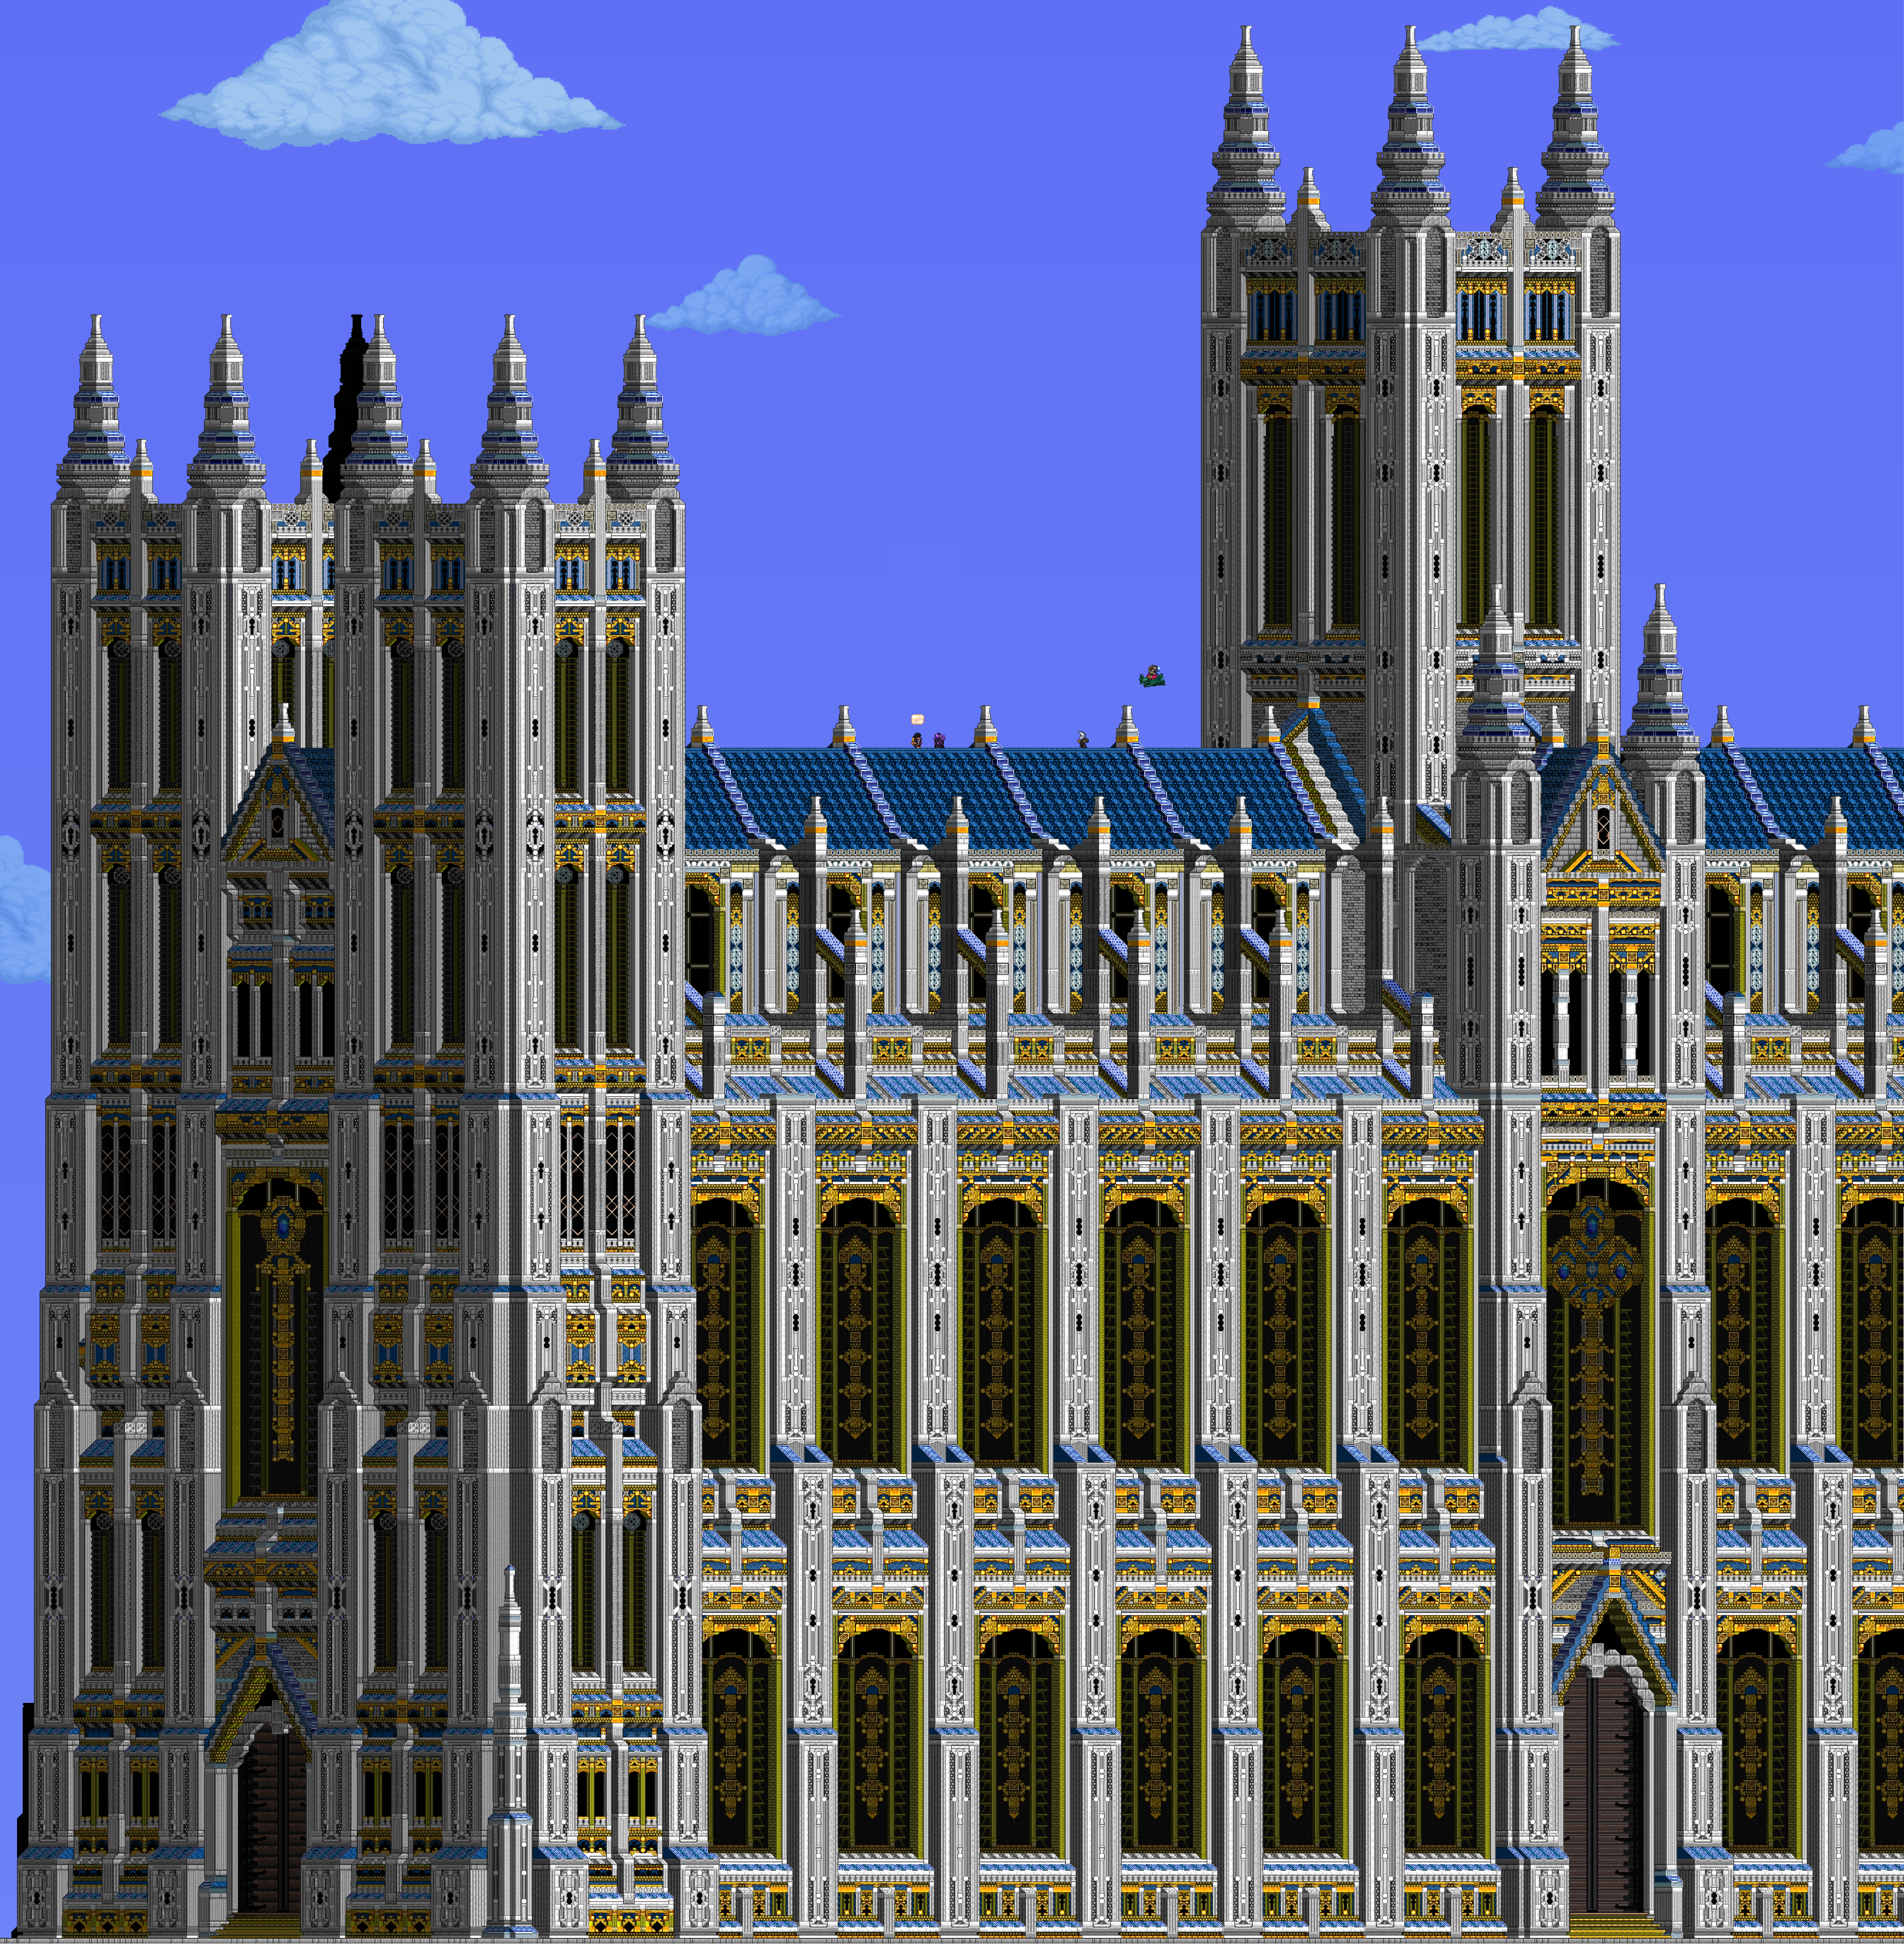 Pope bigmans cathedral but its good.png